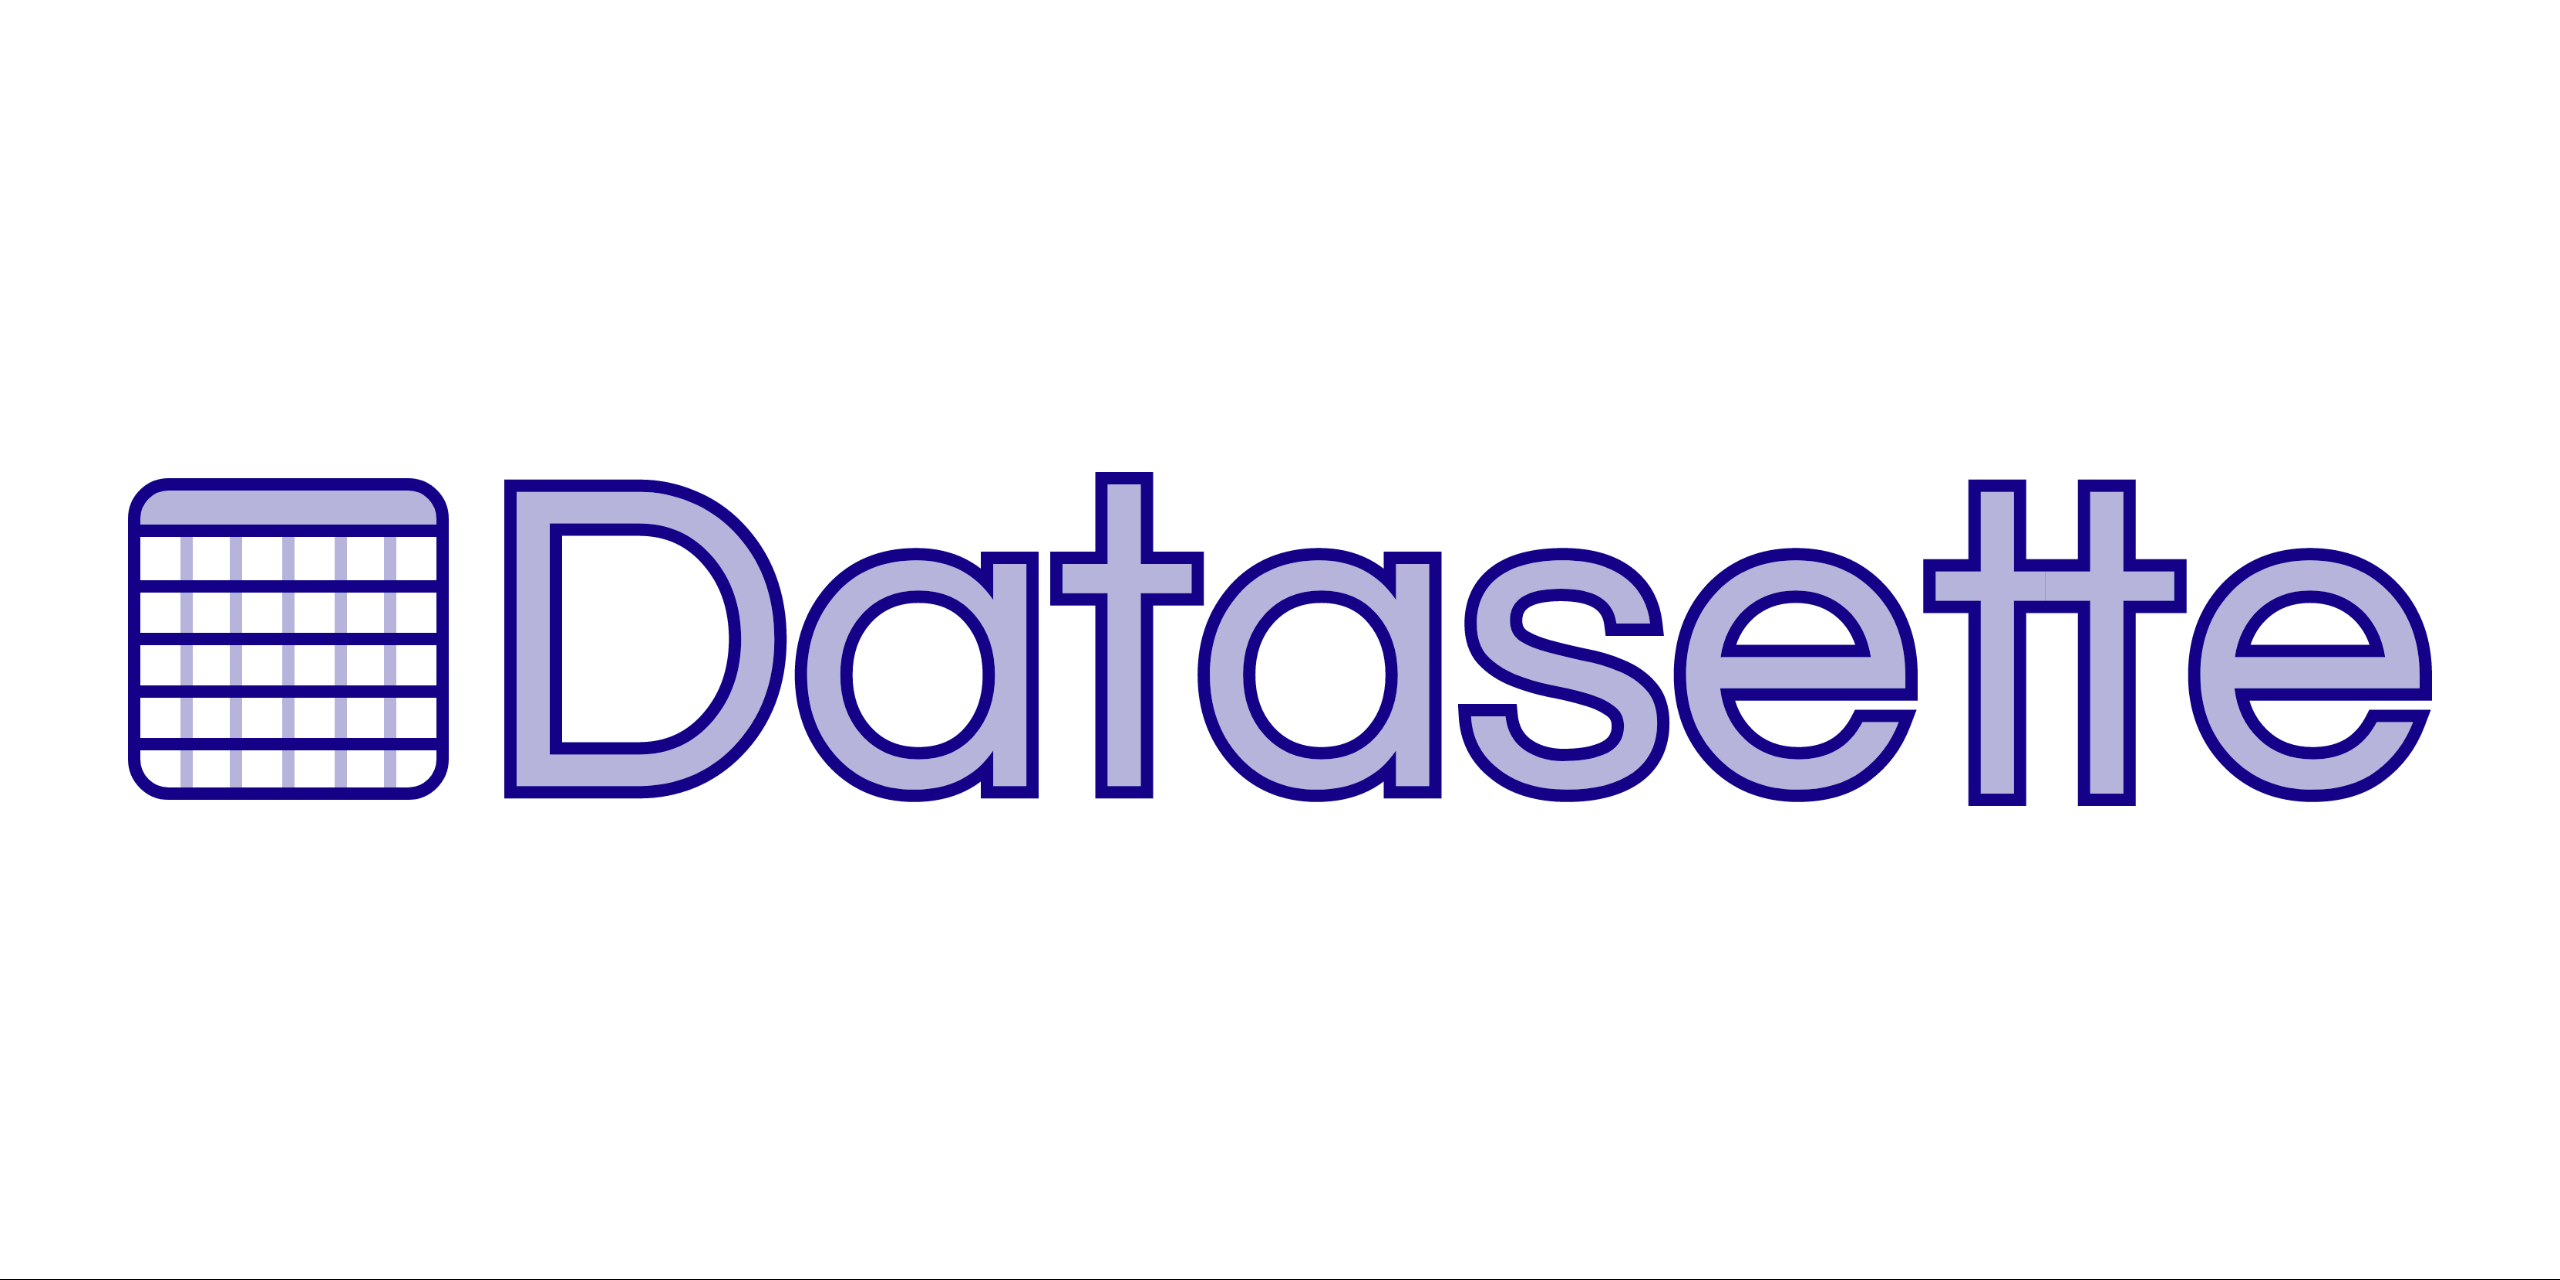 Visit Datasette is 5 today: a call for birthday presents